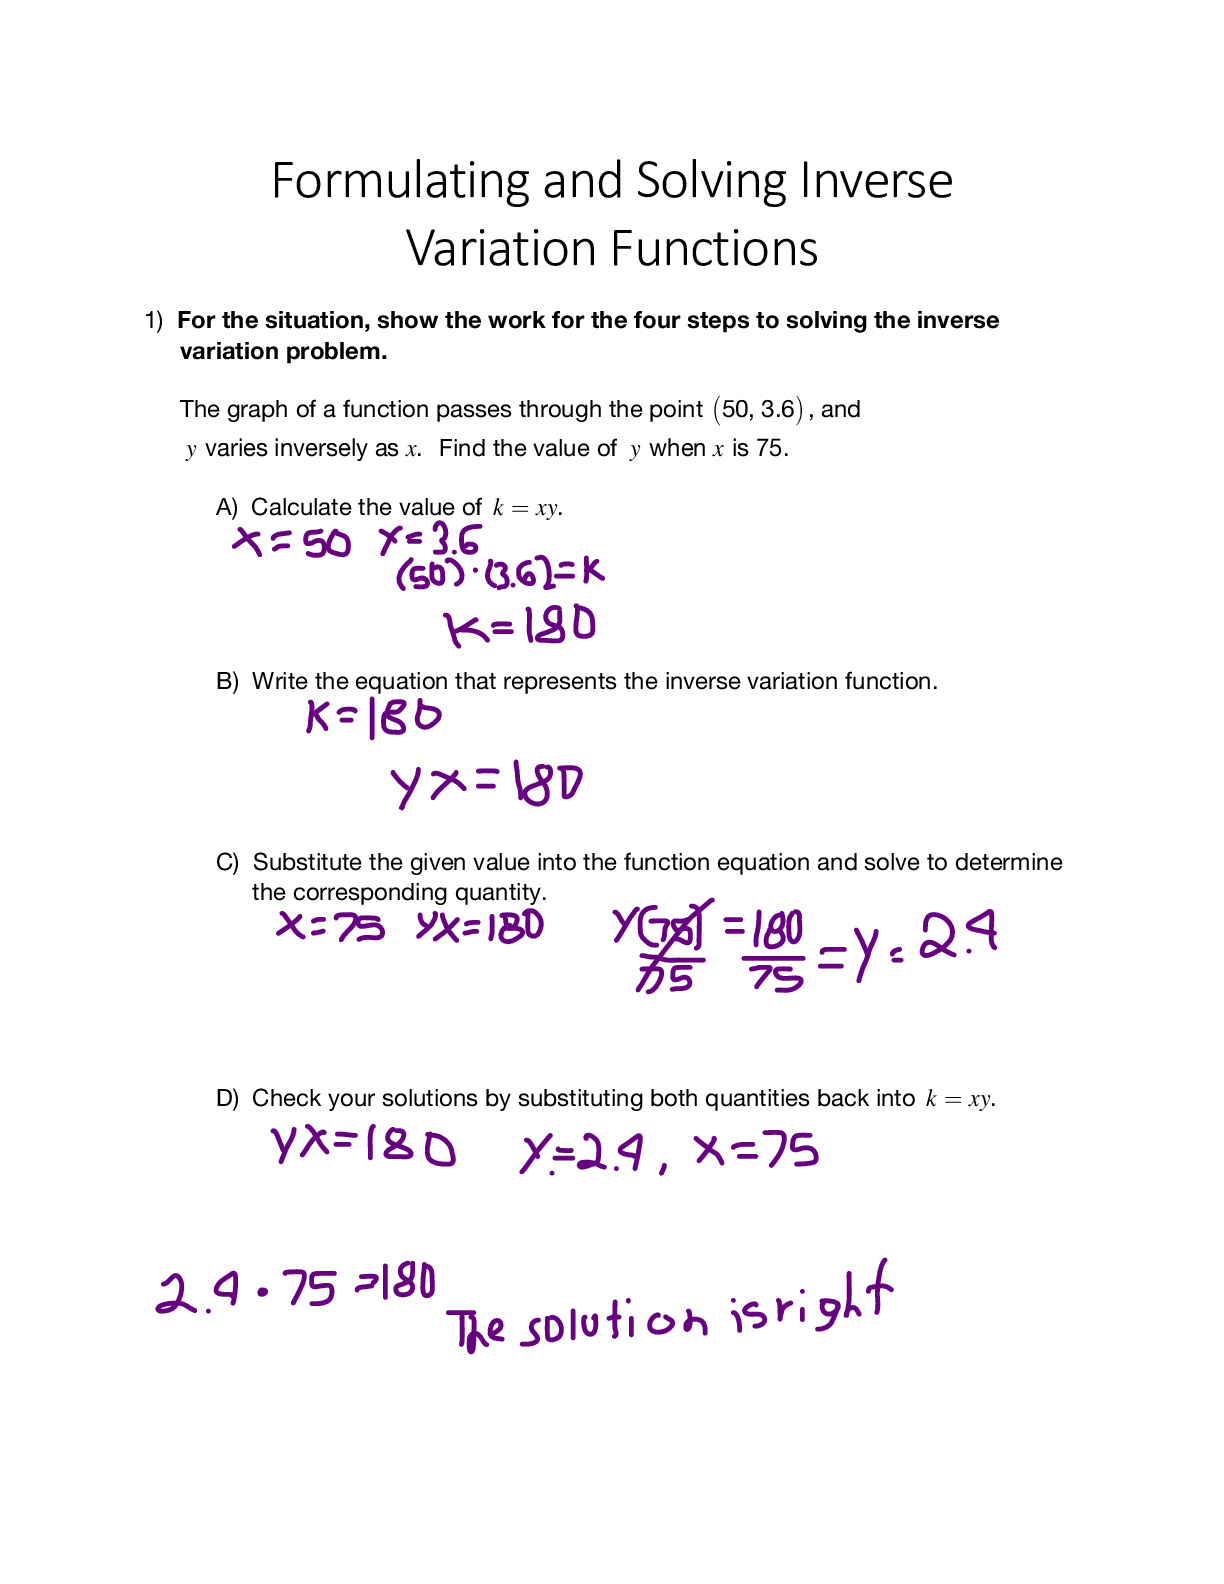 Formulating_and_Solving_Inverse_Variations_Functions__1_.pdf